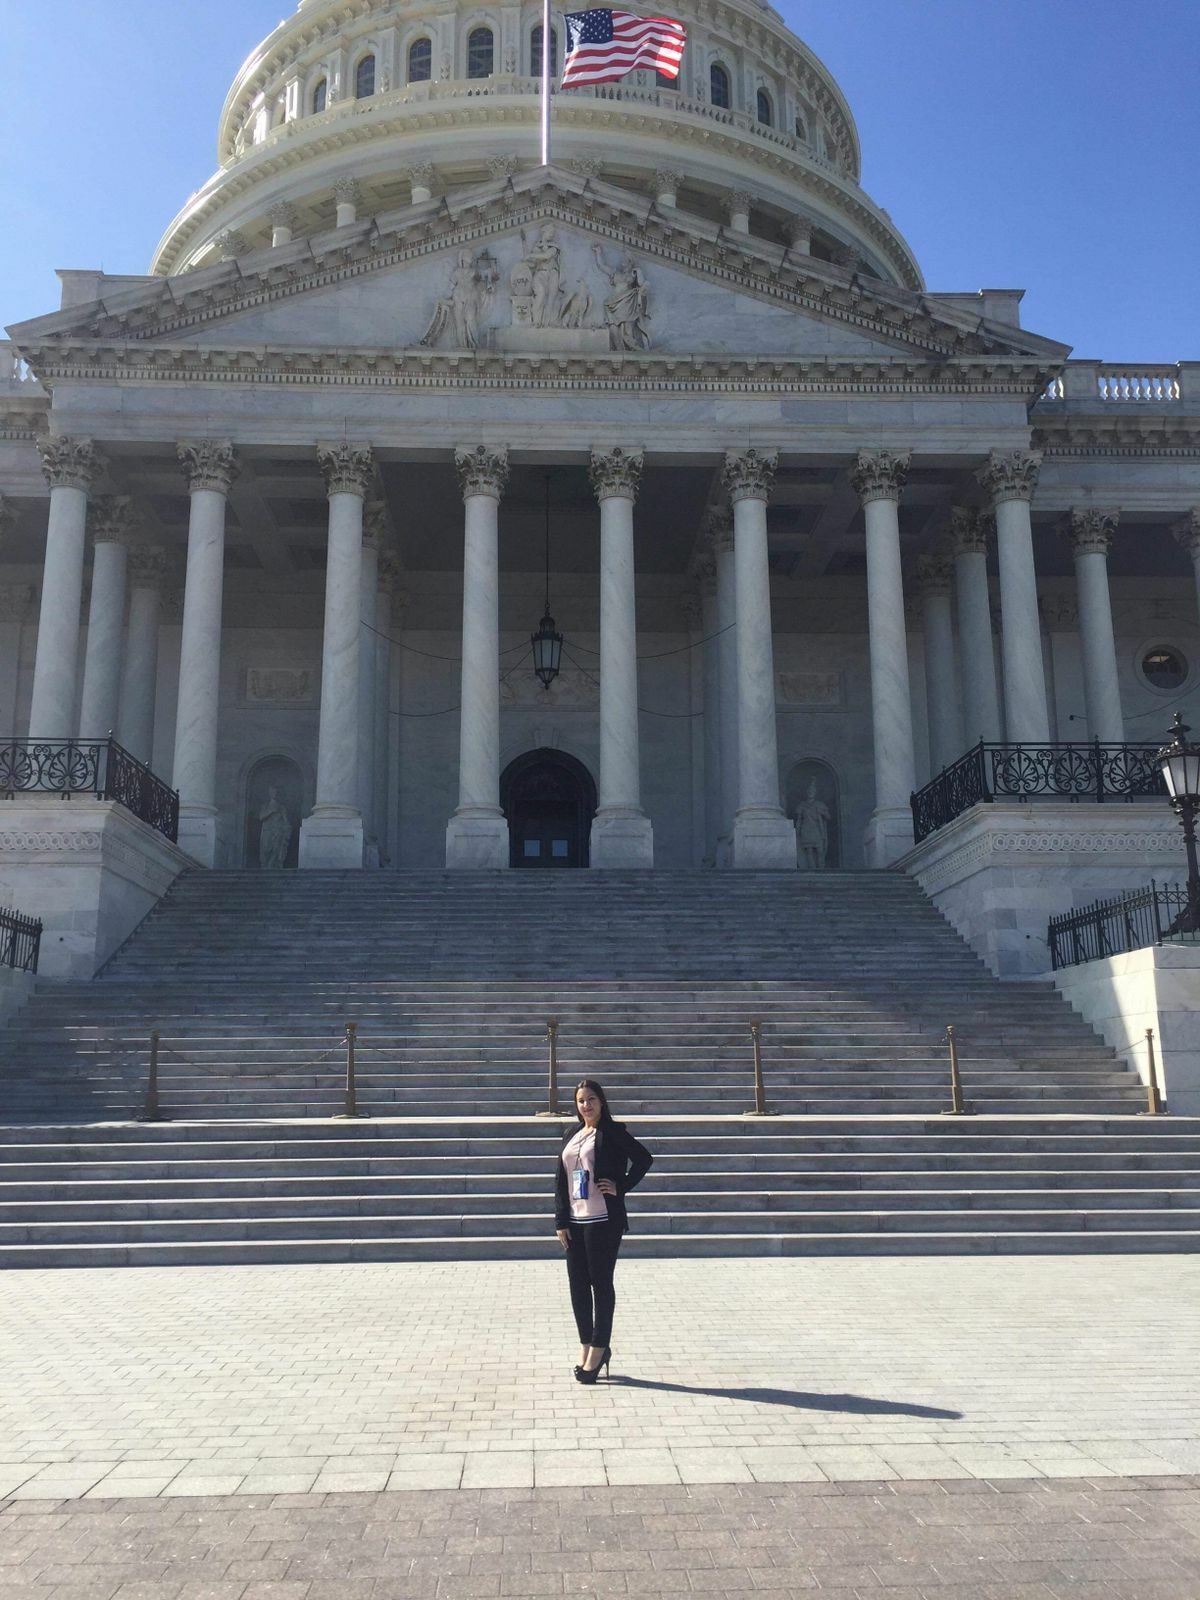 Hiba stands in front of the Captiol building in DC